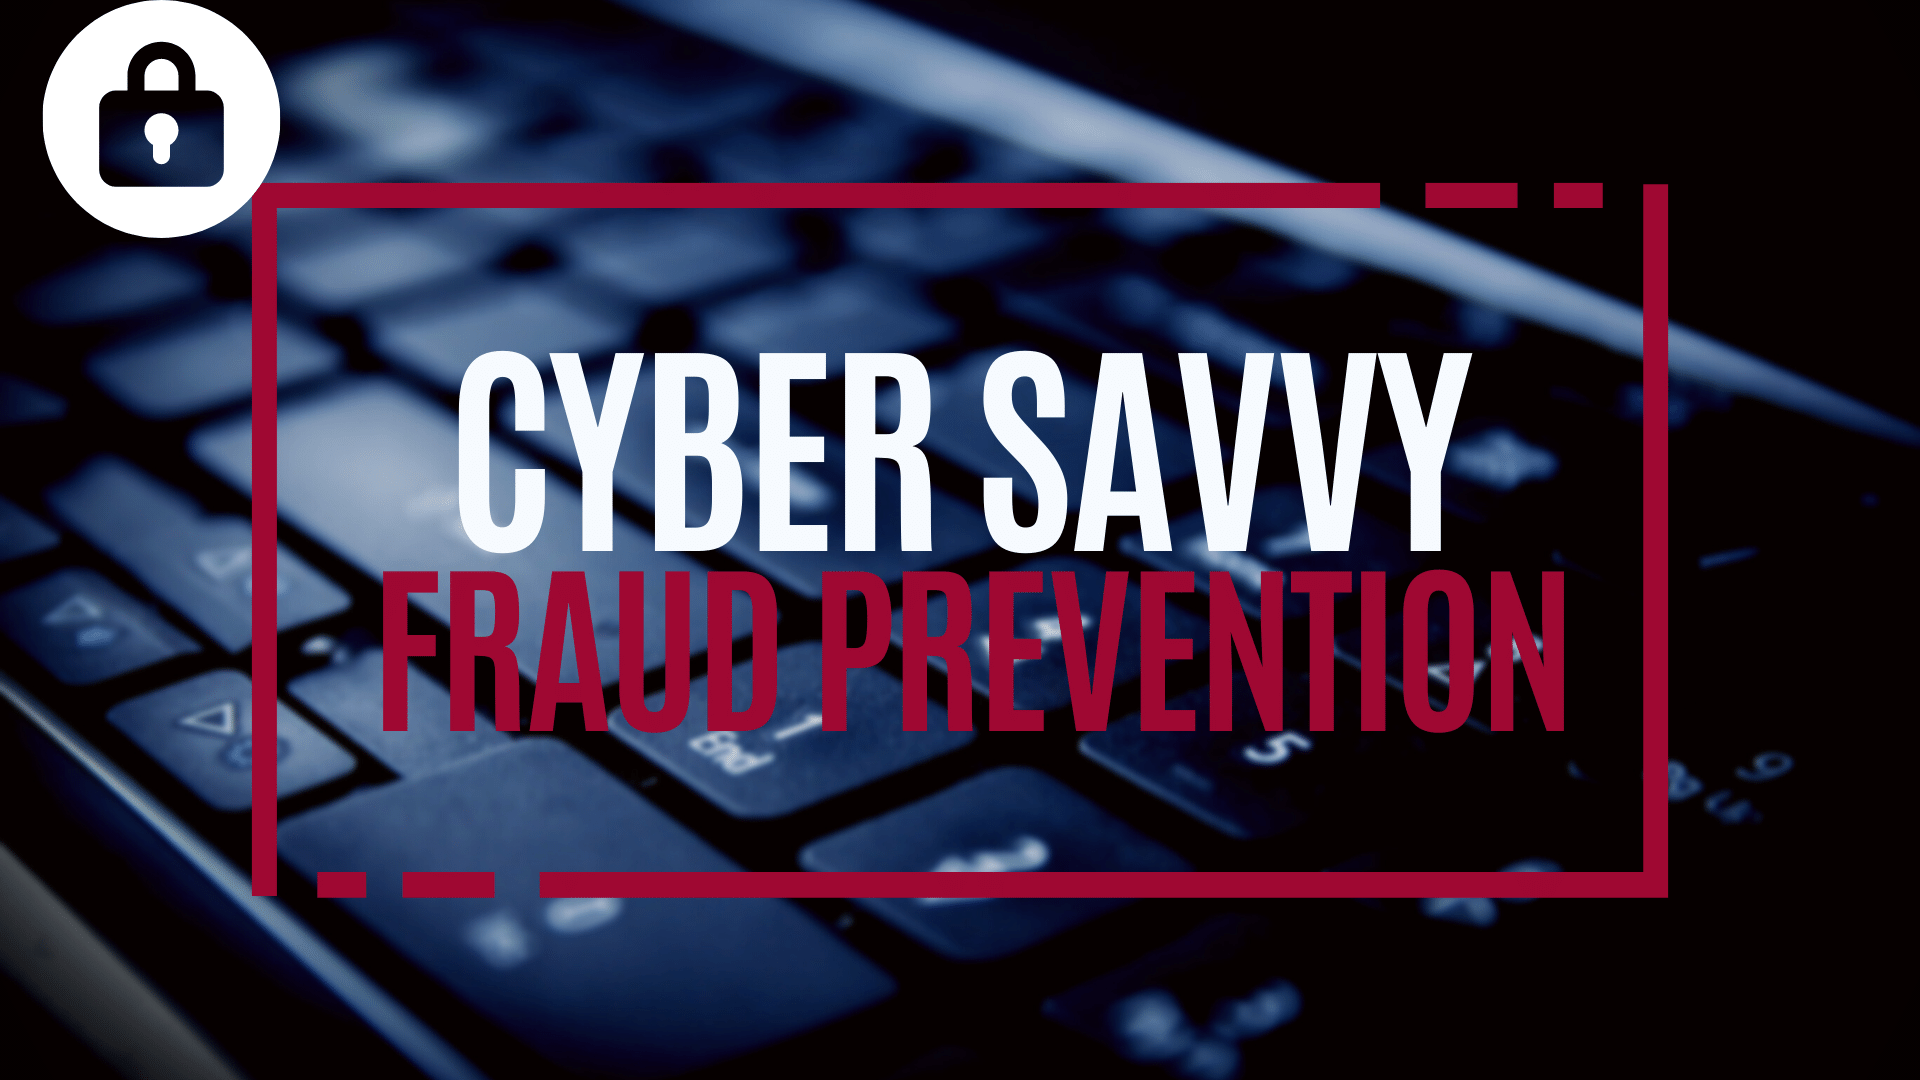 Learn some common ways that cyber crooks try to gain access to your personal information and accounts.